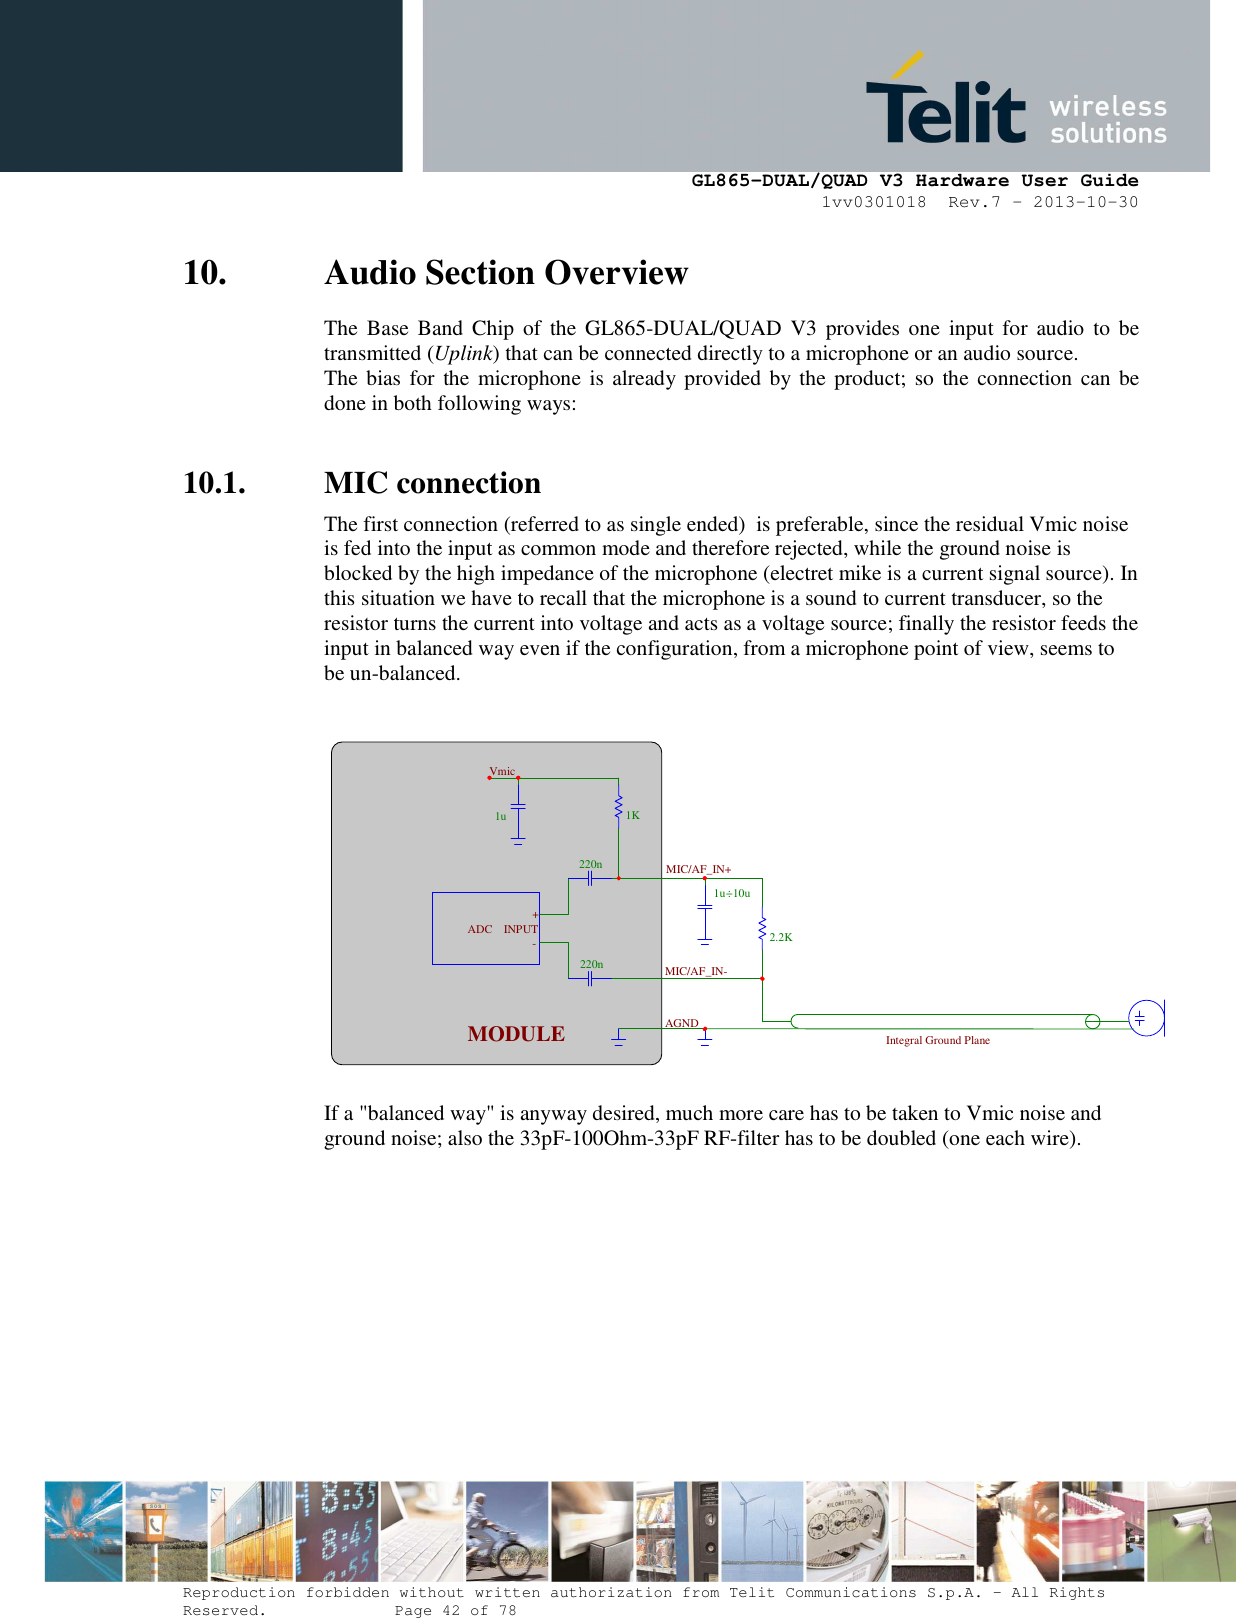      GL865-DUAL/QUAD V3 Hardware User Guide 1vv0301018  Rev.7 – 2013-10-30  Reproduction forbidden without written authorization from Telit Communications S.p.A. - All Rights Reserved.    Page 42 of 78 Mod. 0805 2011-07 Rev.2 10. Audio Section Overview The  Base Band  Chip  of  the  GL865-DUAL/QUAD  V3  provides one  input  for  audio  to  be transmitted (Uplink) that can be connected directly to a microphone or an audio source. The bias  for  the  microphone  is  already provided by the  product; so  the  connection can be done in both following ways:  10.1. MIC connection The first connection (referred to as single ended)  is preferable, since the residual Vmic noise is fed into the input as common mode and therefore rejected, while the ground noise is blocked by the high impedance of the microphone (electret mike is a current signal source). In this situation we have to recall that the microphone is a sound to current transducer, so the resistor turns the current into voltage and acts as a voltage source; finally the resistor feeds the input in balanced way even if the configuration, from a microphone point of view, seems to be un-balanced.     If a &quot;balanced way&quot; is anyway desired, much more care has to be taken to Vmic noise and ground noise; also the 33pF-100Ohm-33pF RF-filter has to be doubled (one each wire).  1u220n220n1K 2.2K1u ÷10u MODULE-+INPUTADCVmicMIC/AF_IN+MIC/AF_IN-AGND Integral Ground Plane 